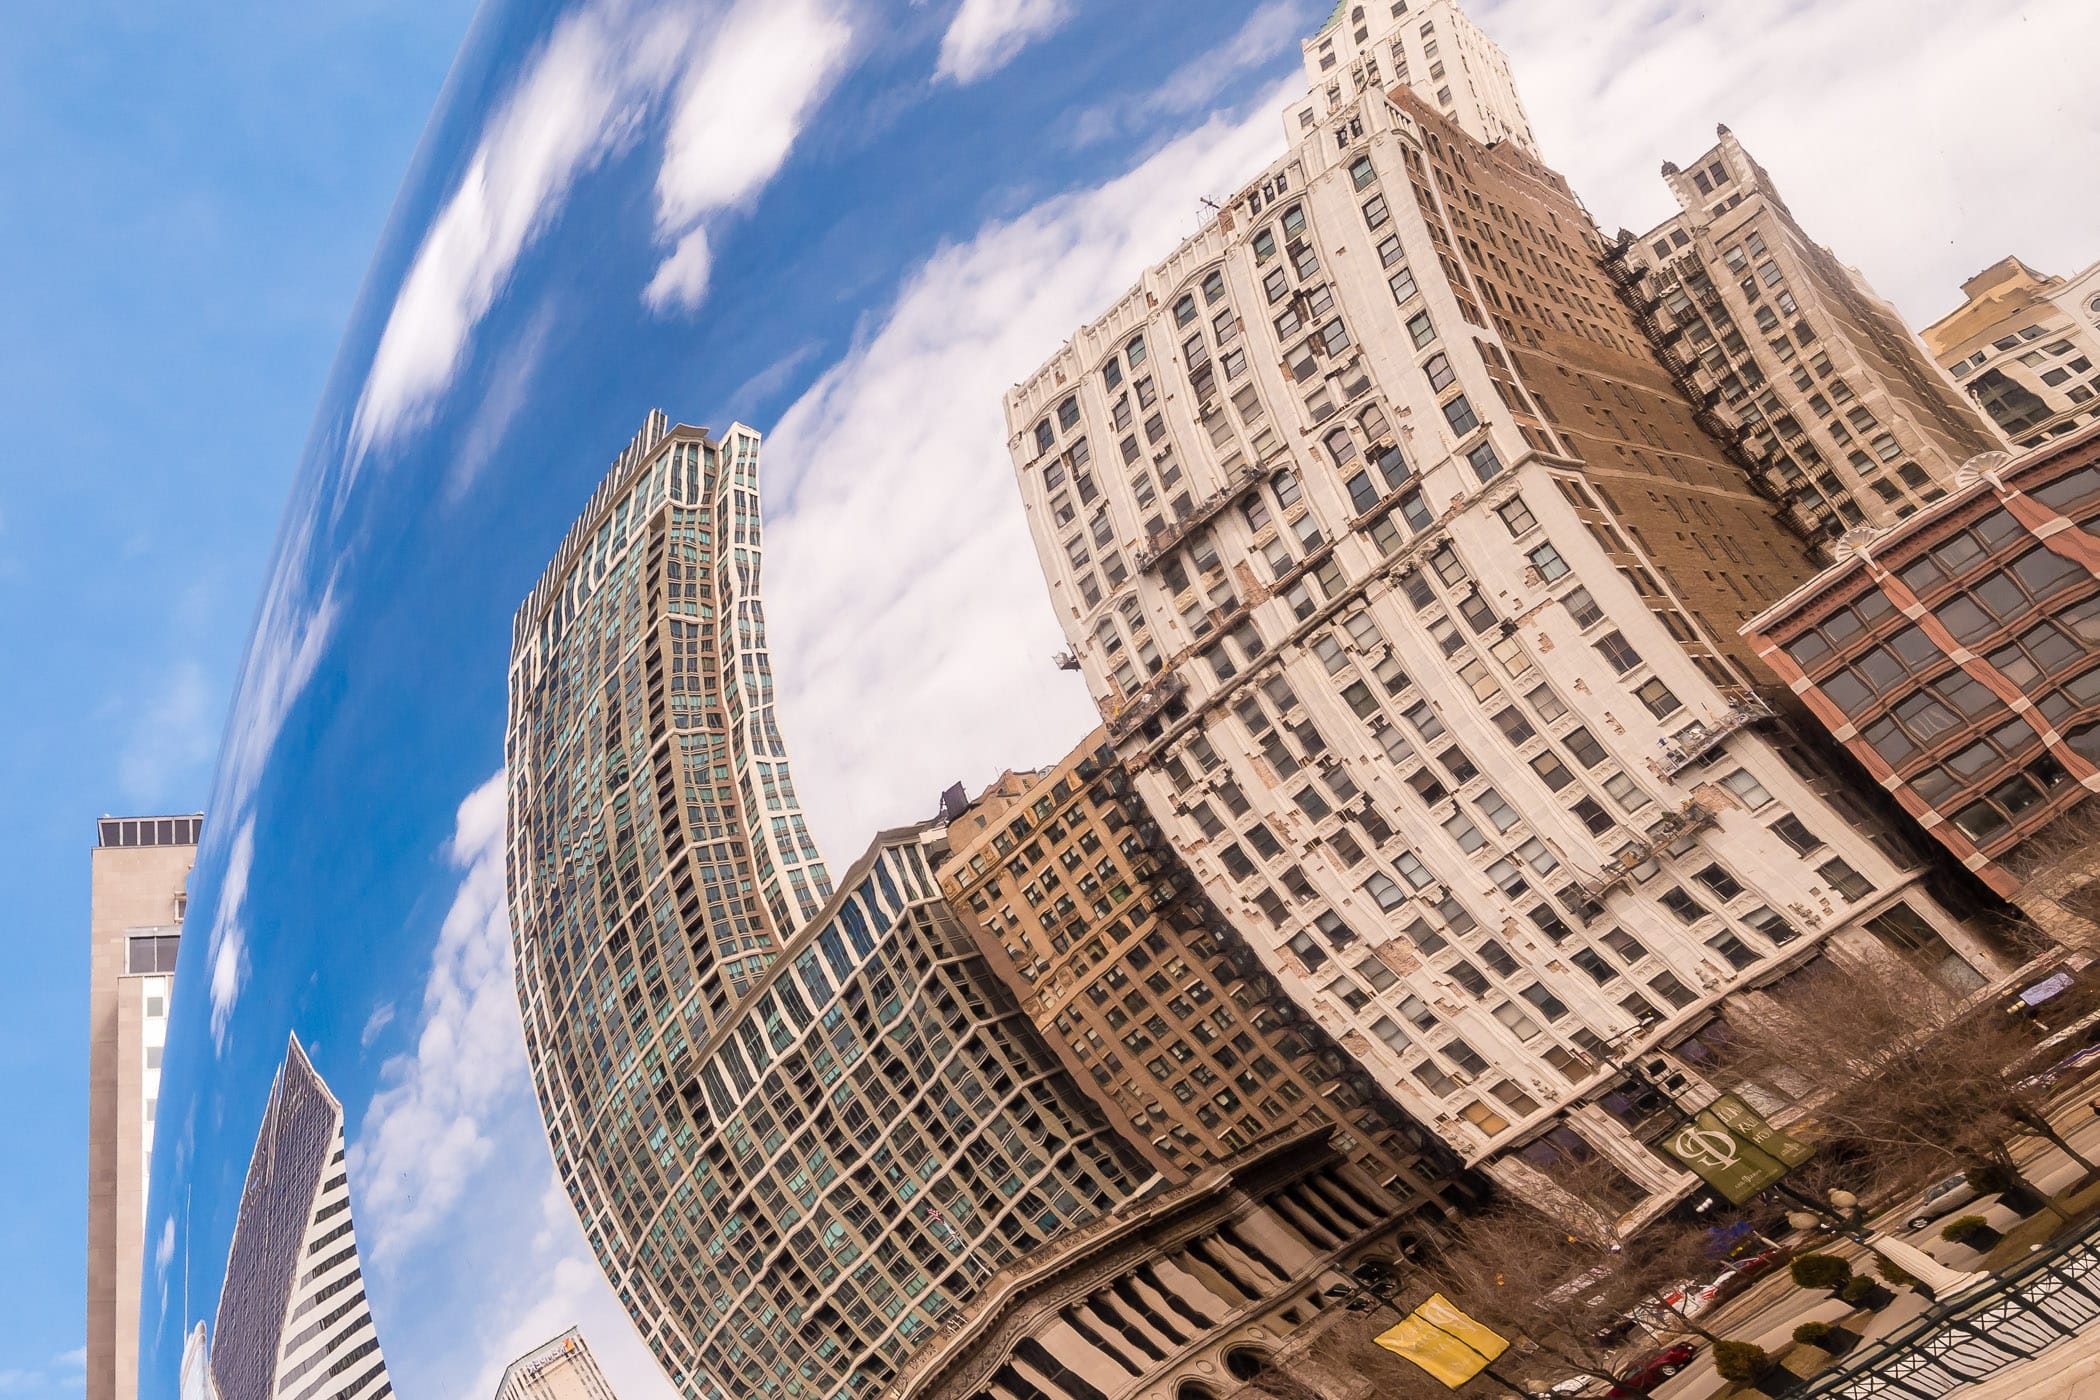 The reflections of adjacent buildings are bent and twisted in the polished stainless steel skin of Anish Kapoor’s Cloud Gate, colloquially known as “The Bean”, in Millennium Park, Chicago.